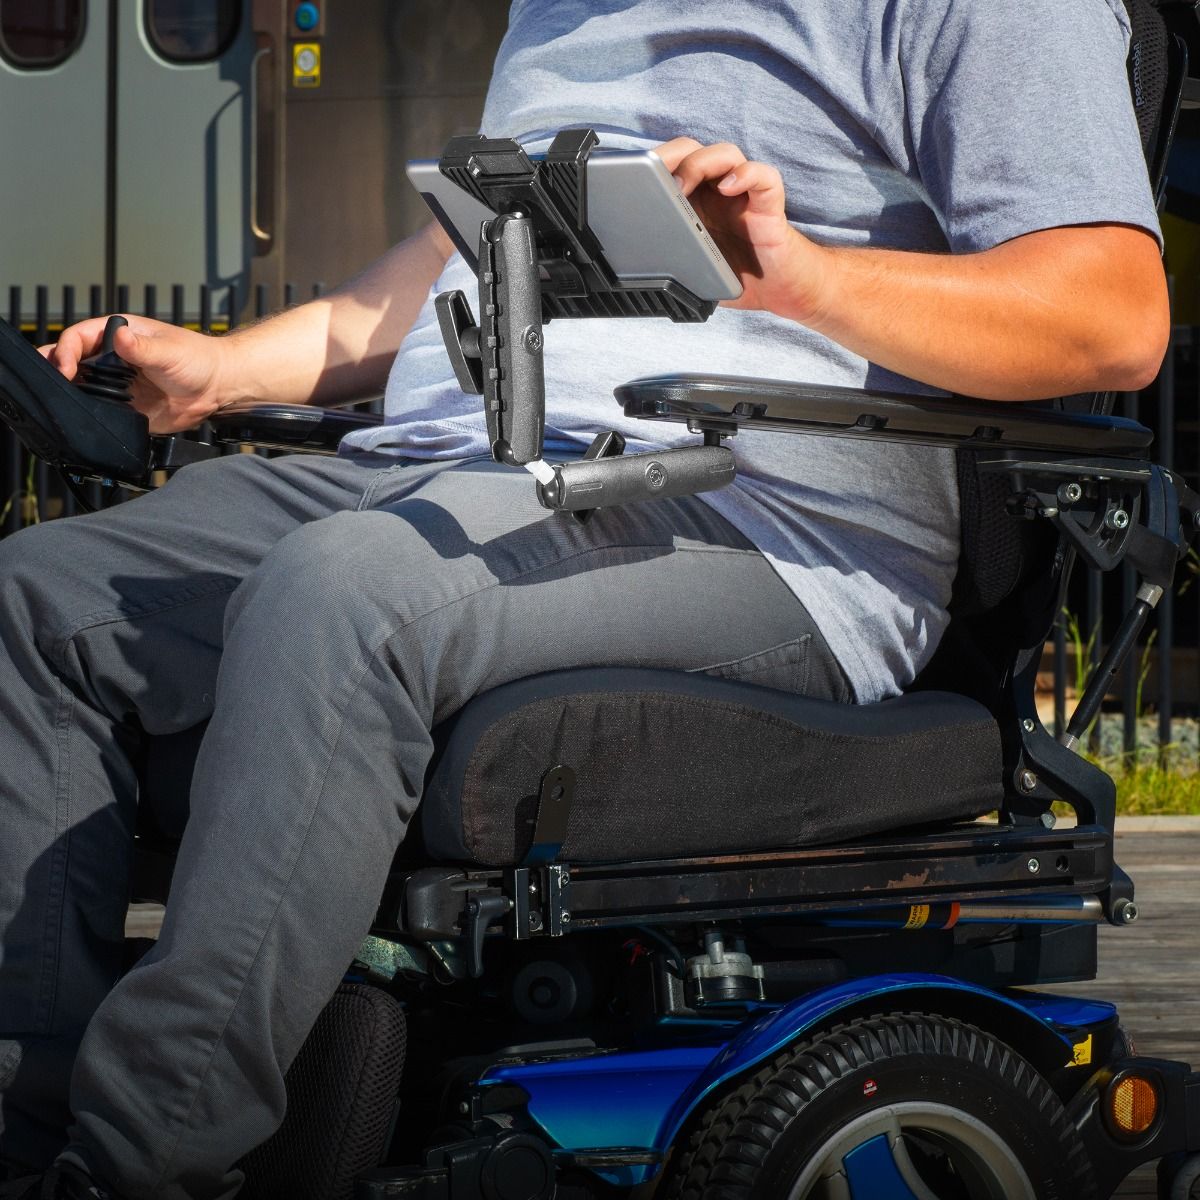 iBOLT AccessiBOLT ArmTrack- for Wheelchairs, Rehab Chairs, and Mobility Devices with a Track System